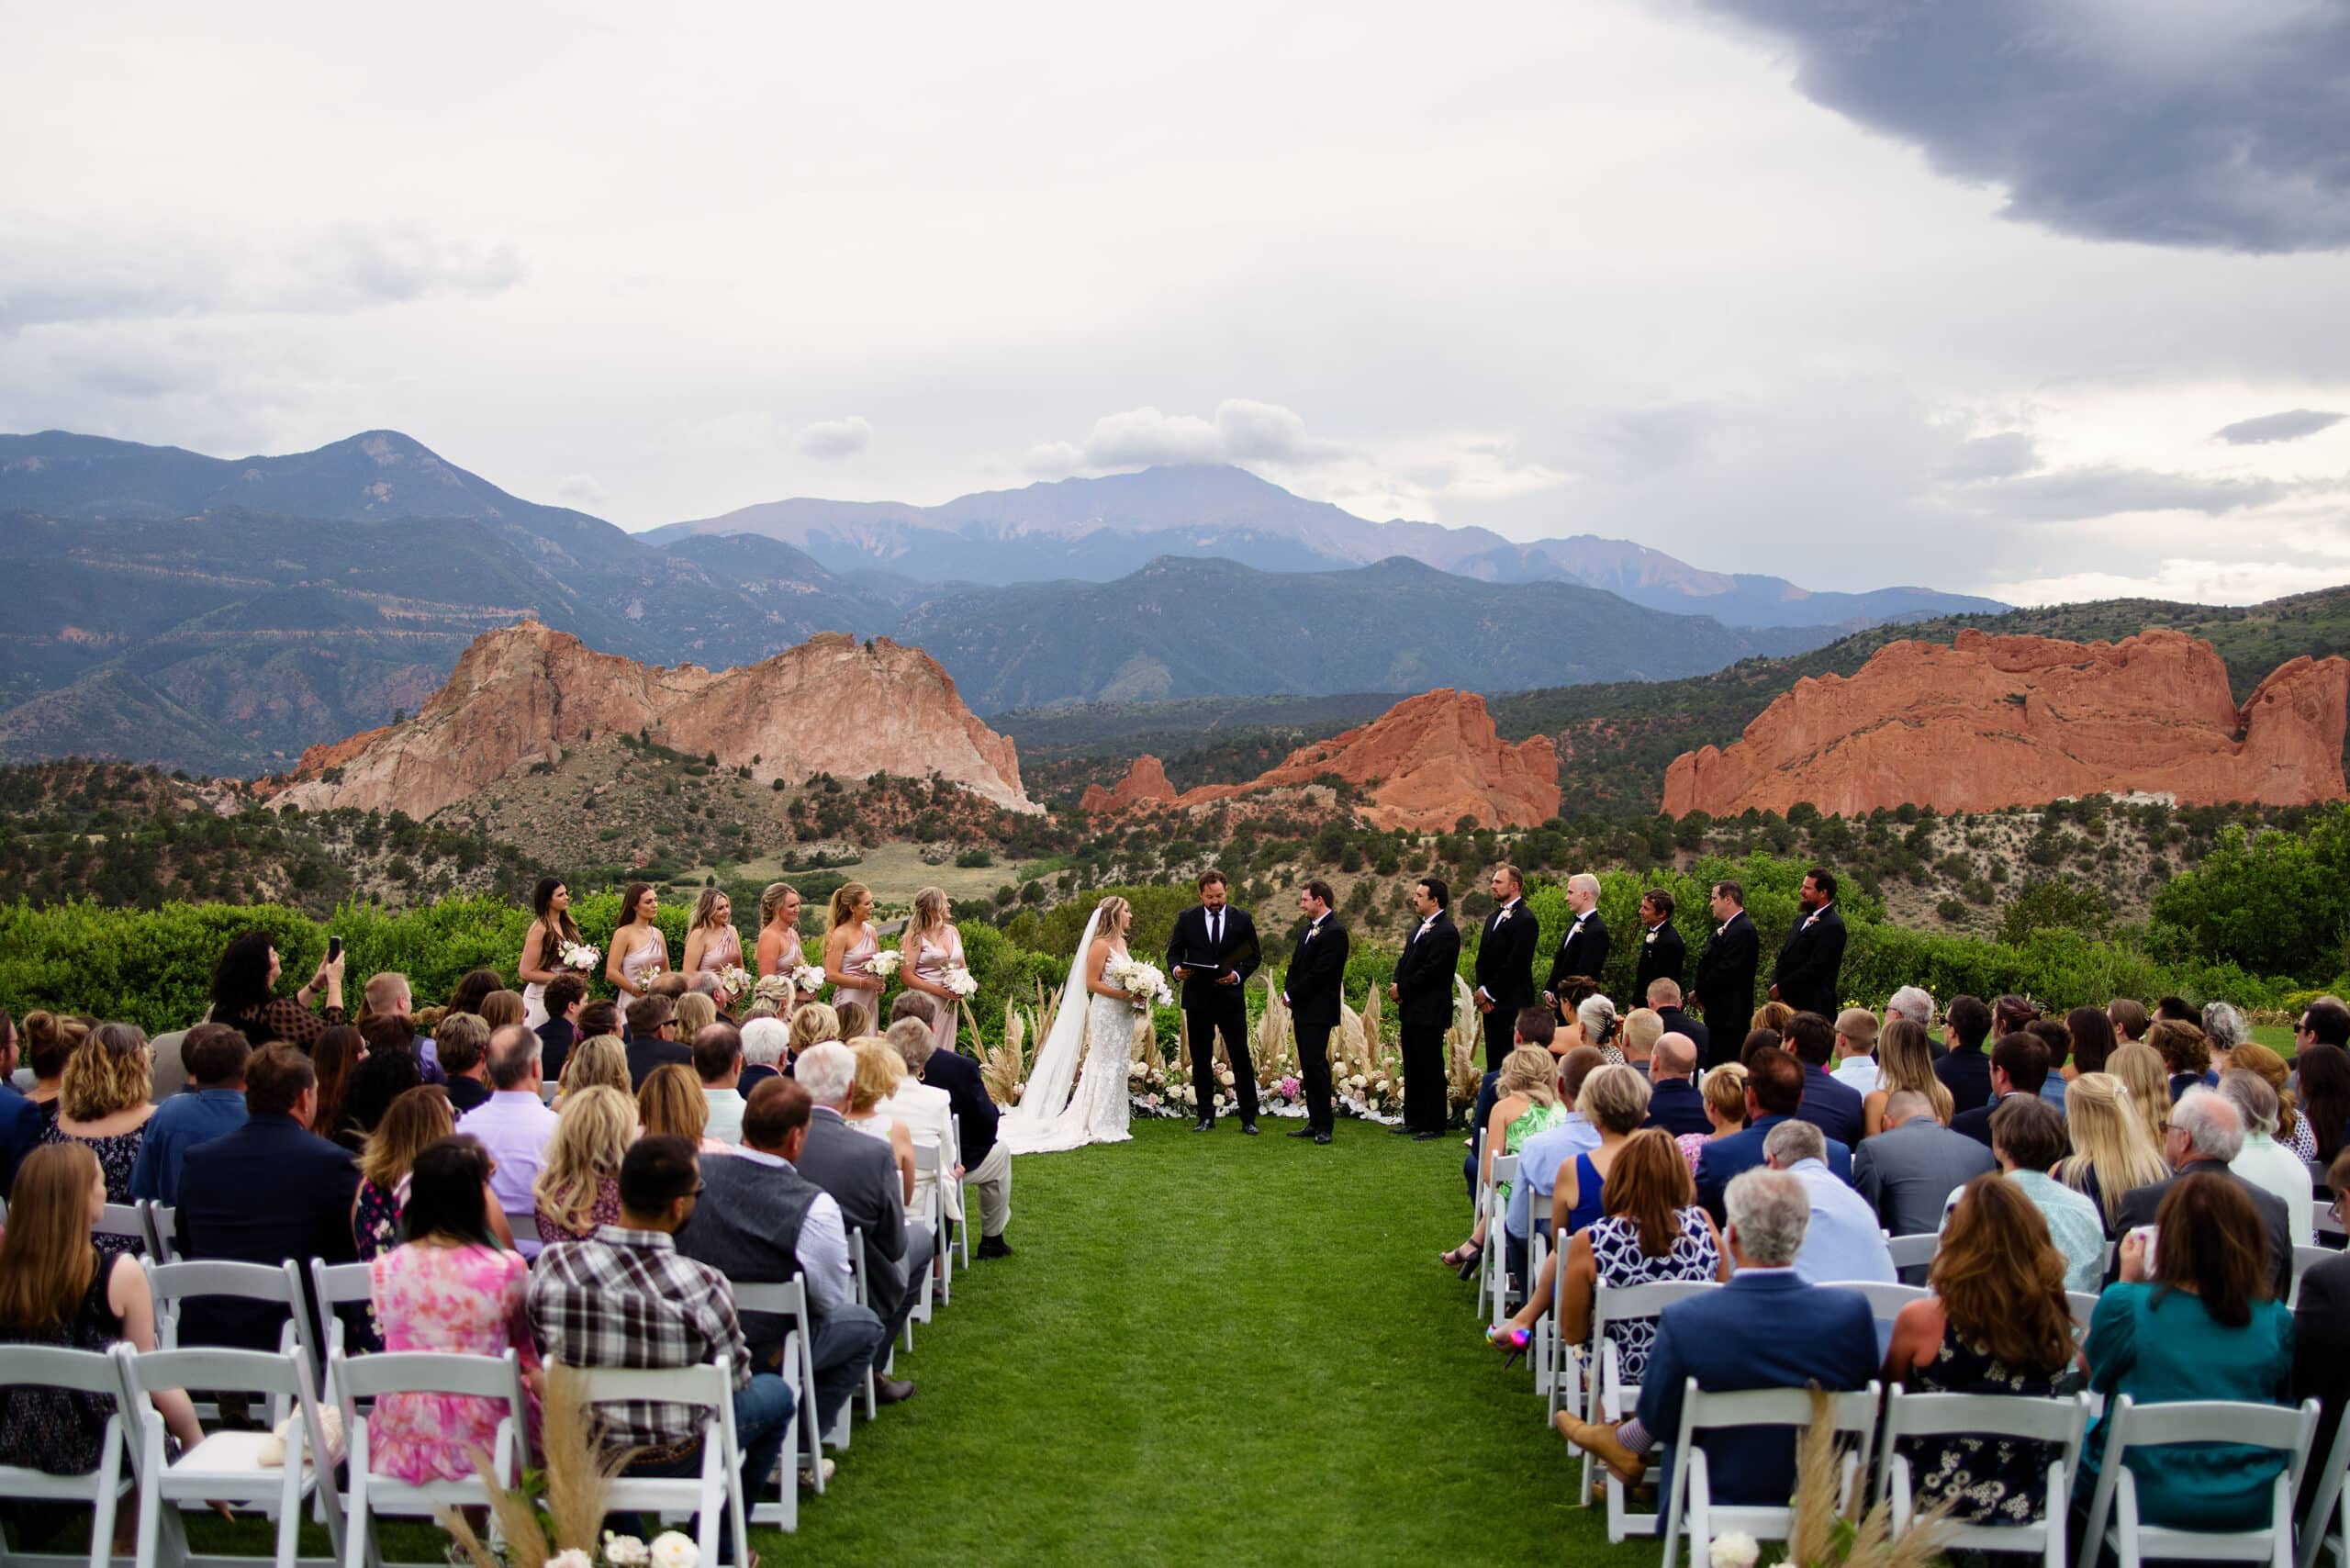 Jamie and Chad’s wedding ceremony at Garden of the Gods Resort in June